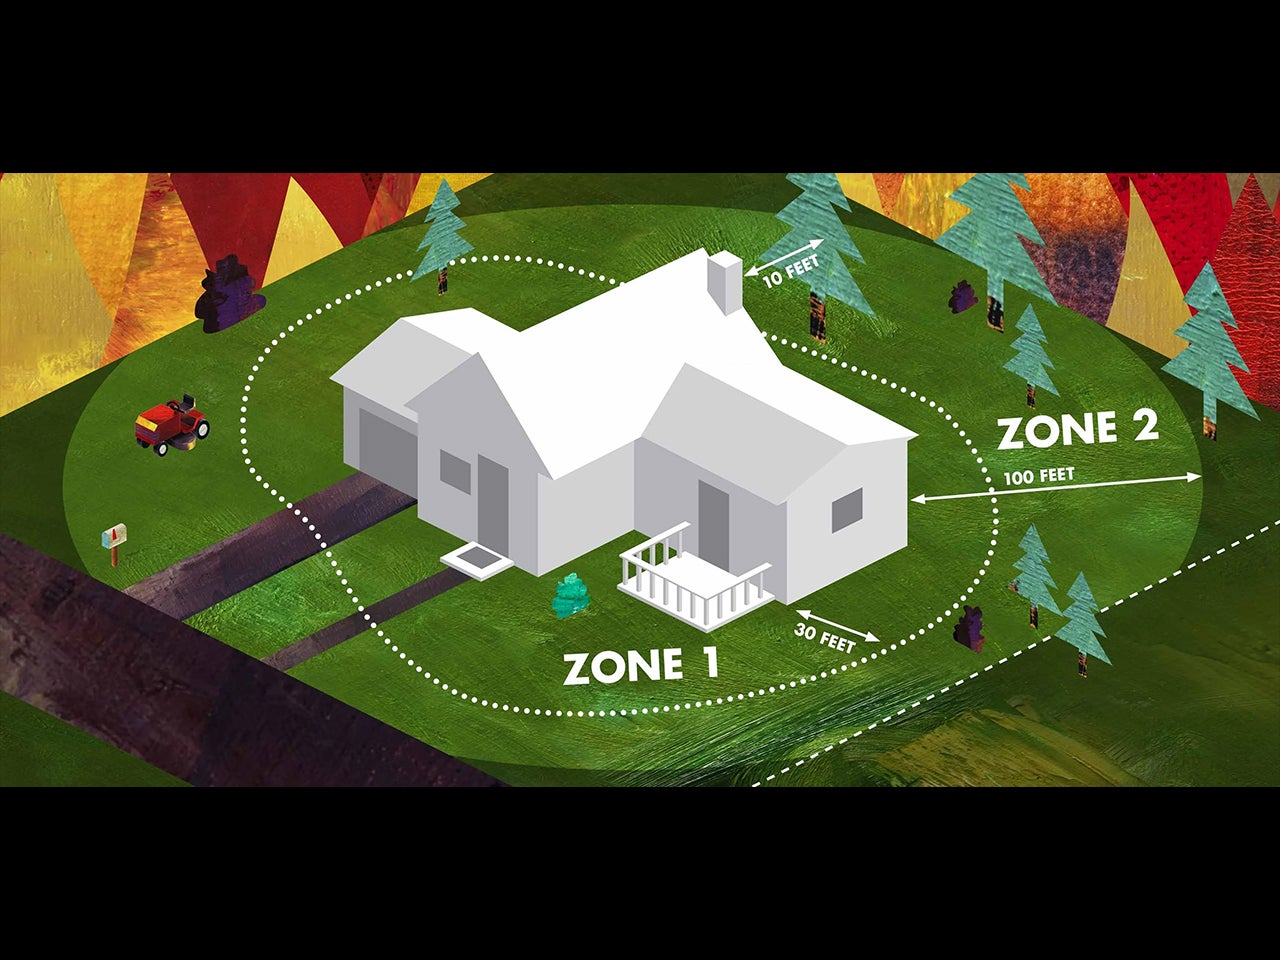 Diagram showing defensible space zones where Zone 1 is closer to the house and Zone 2 is farther away